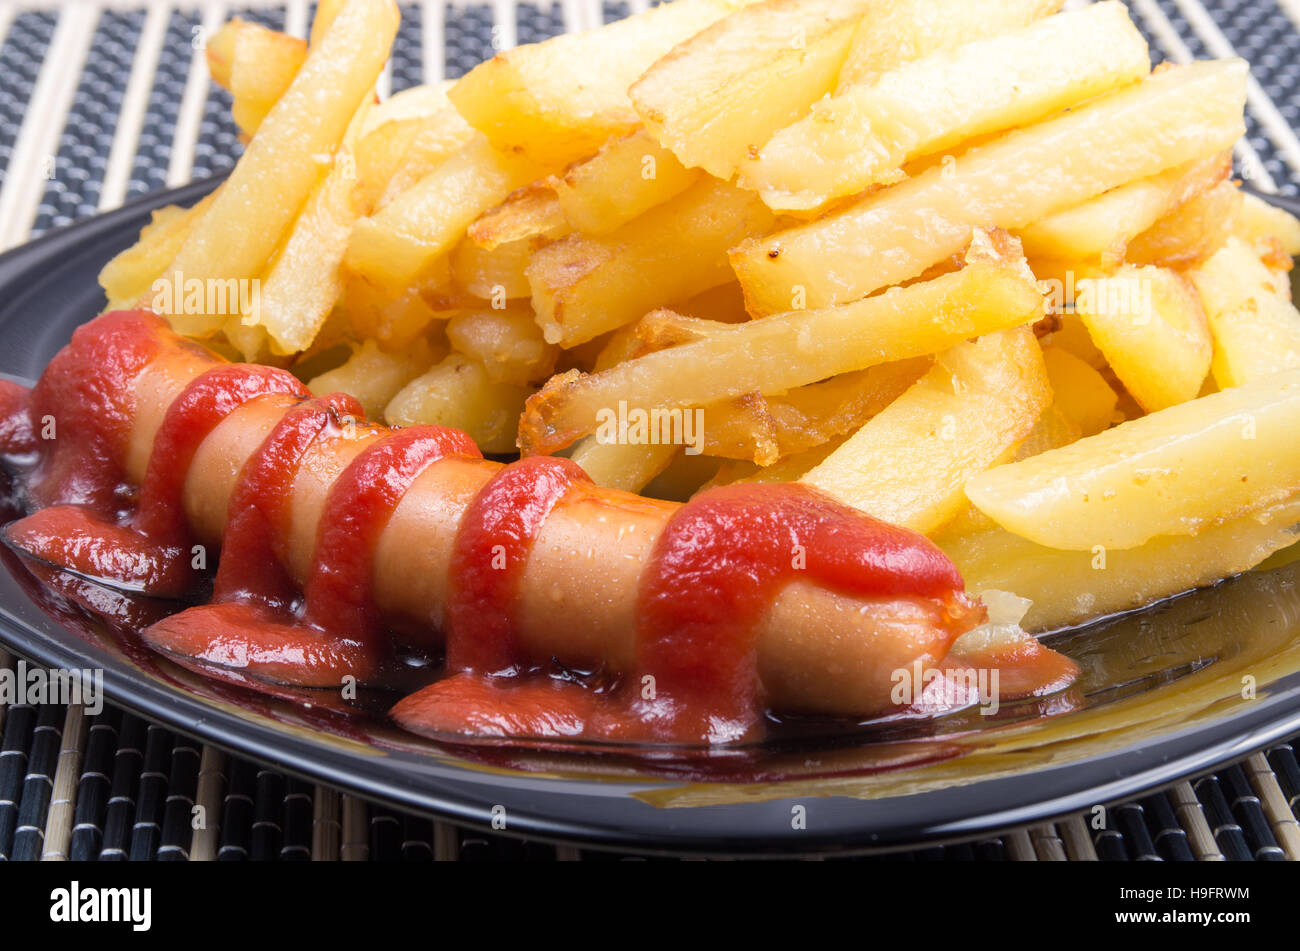 Fried sausage and french fries decorated with tomato sauce on a dark  plate close-up Stock Photo